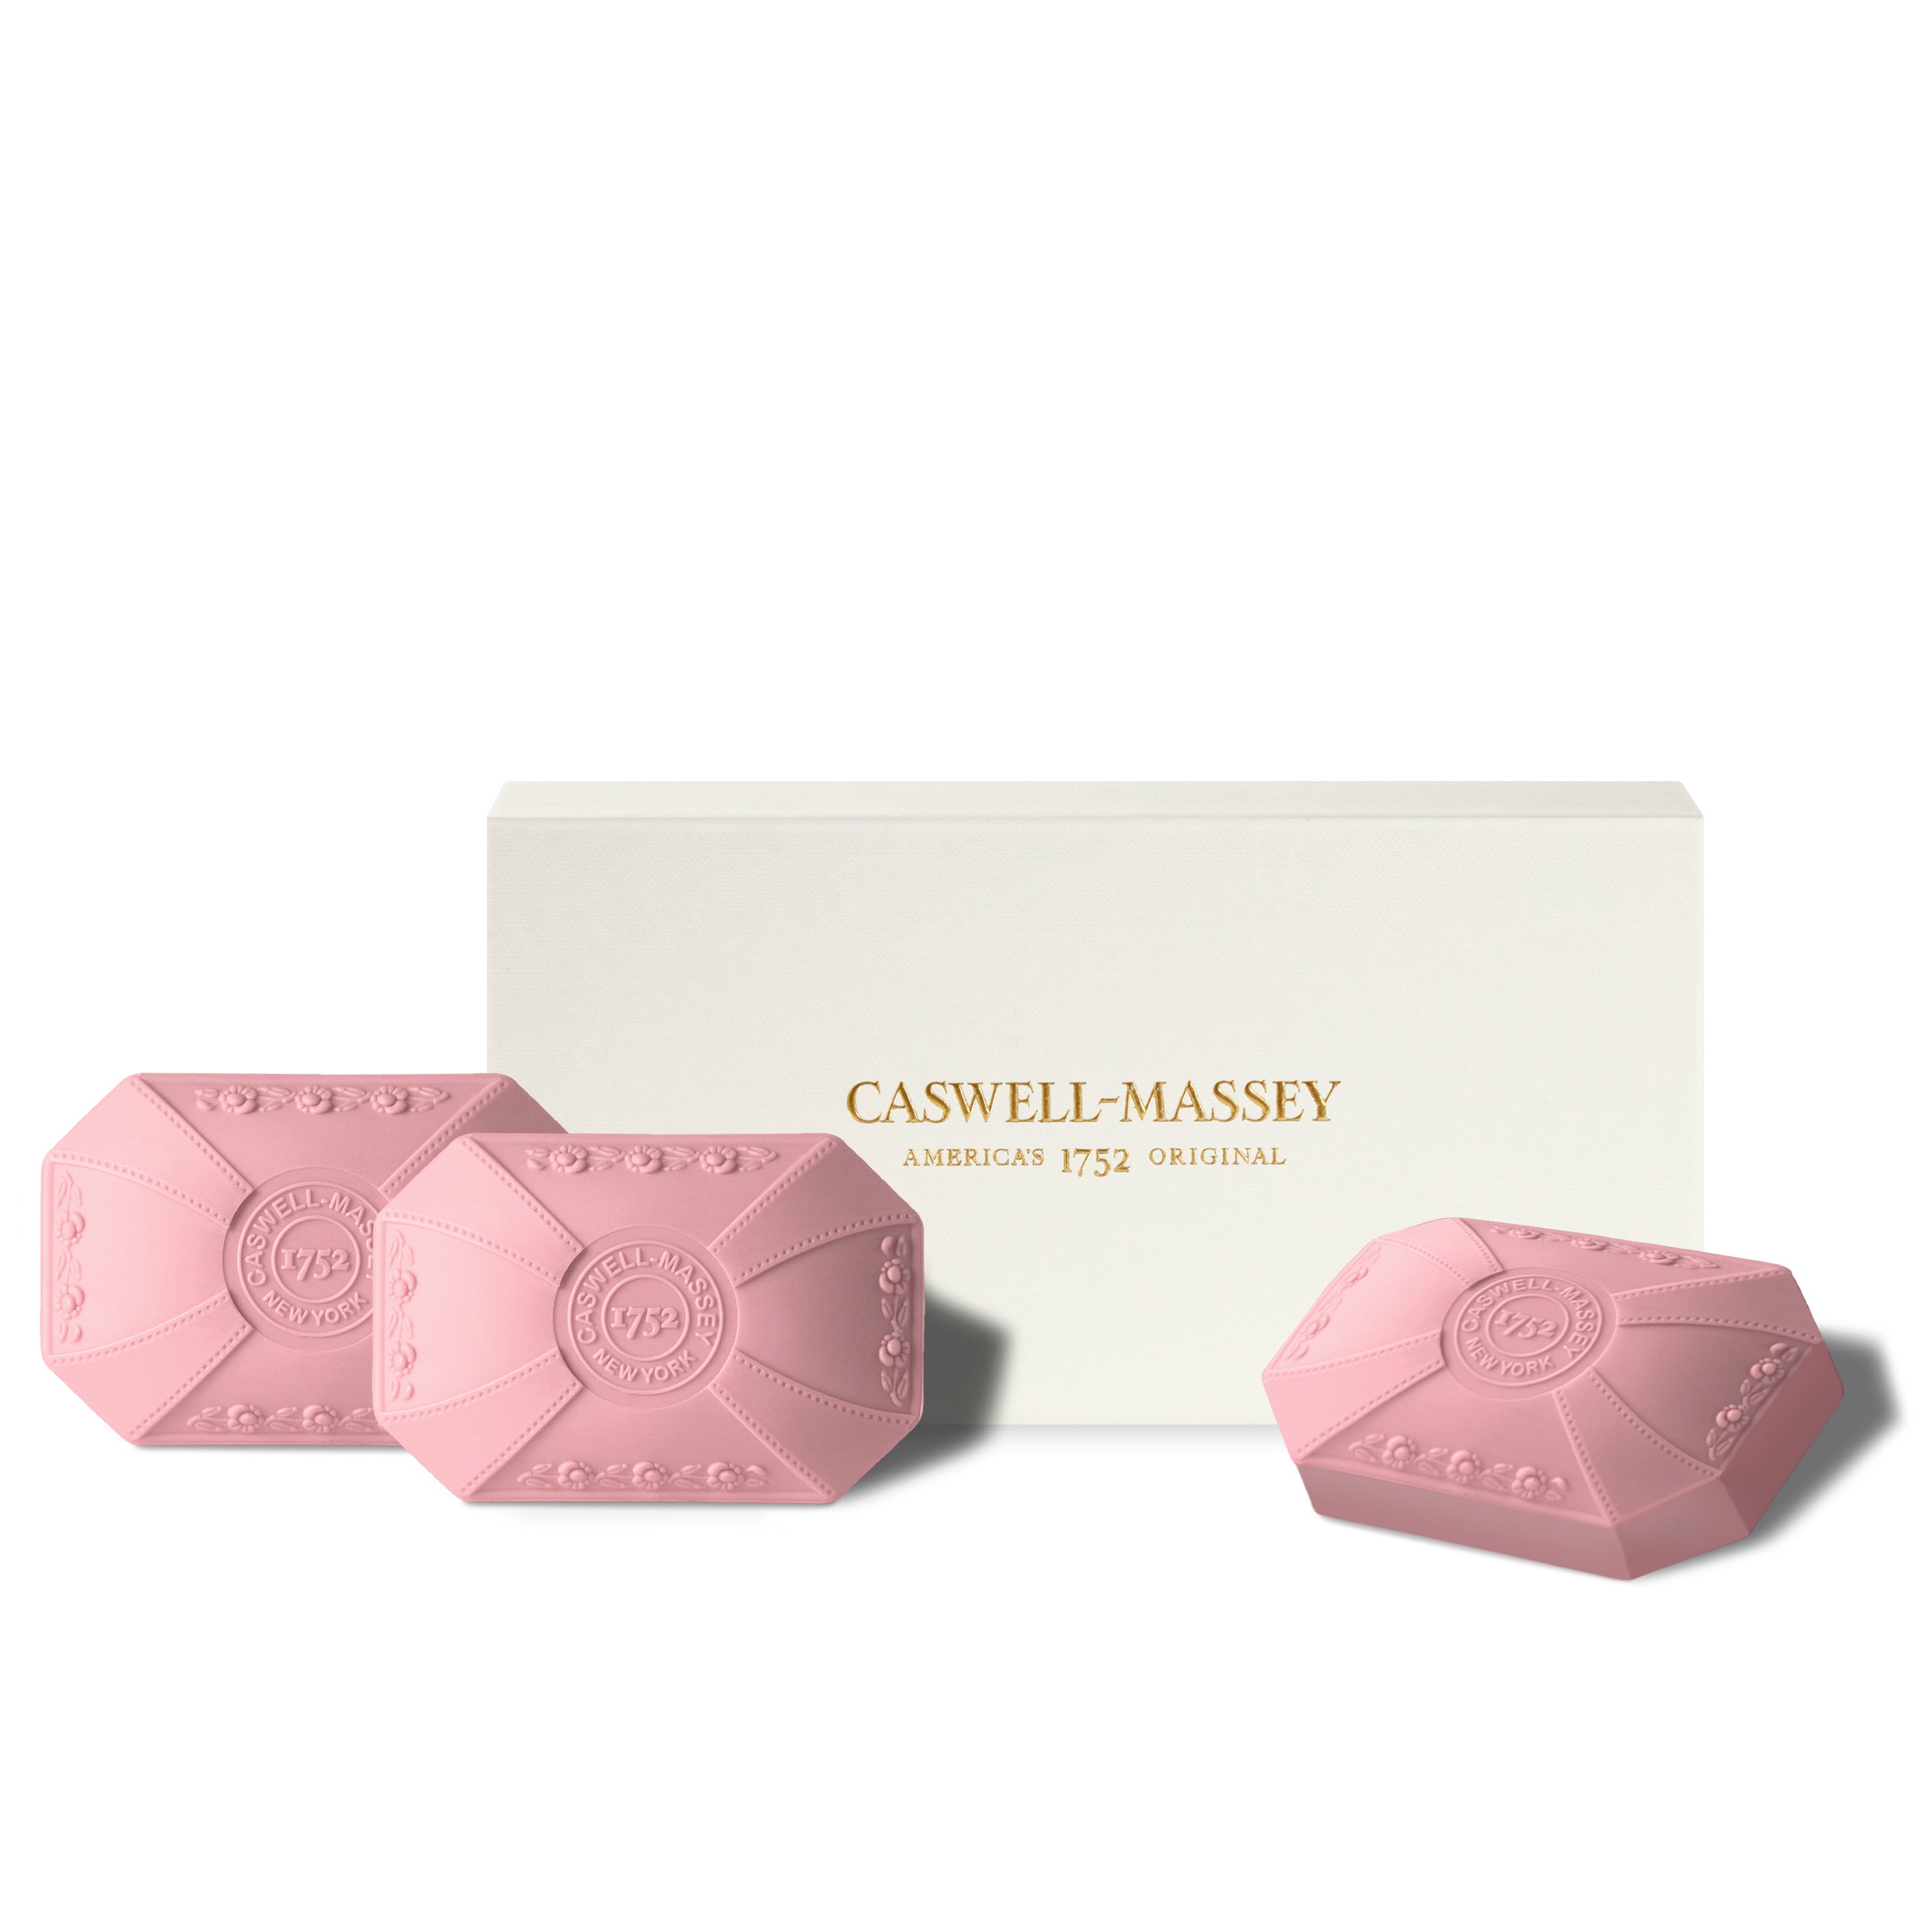 Caswell-Massey Rose 3-Soap Set shown with gift box alongside rose pink bar soaps